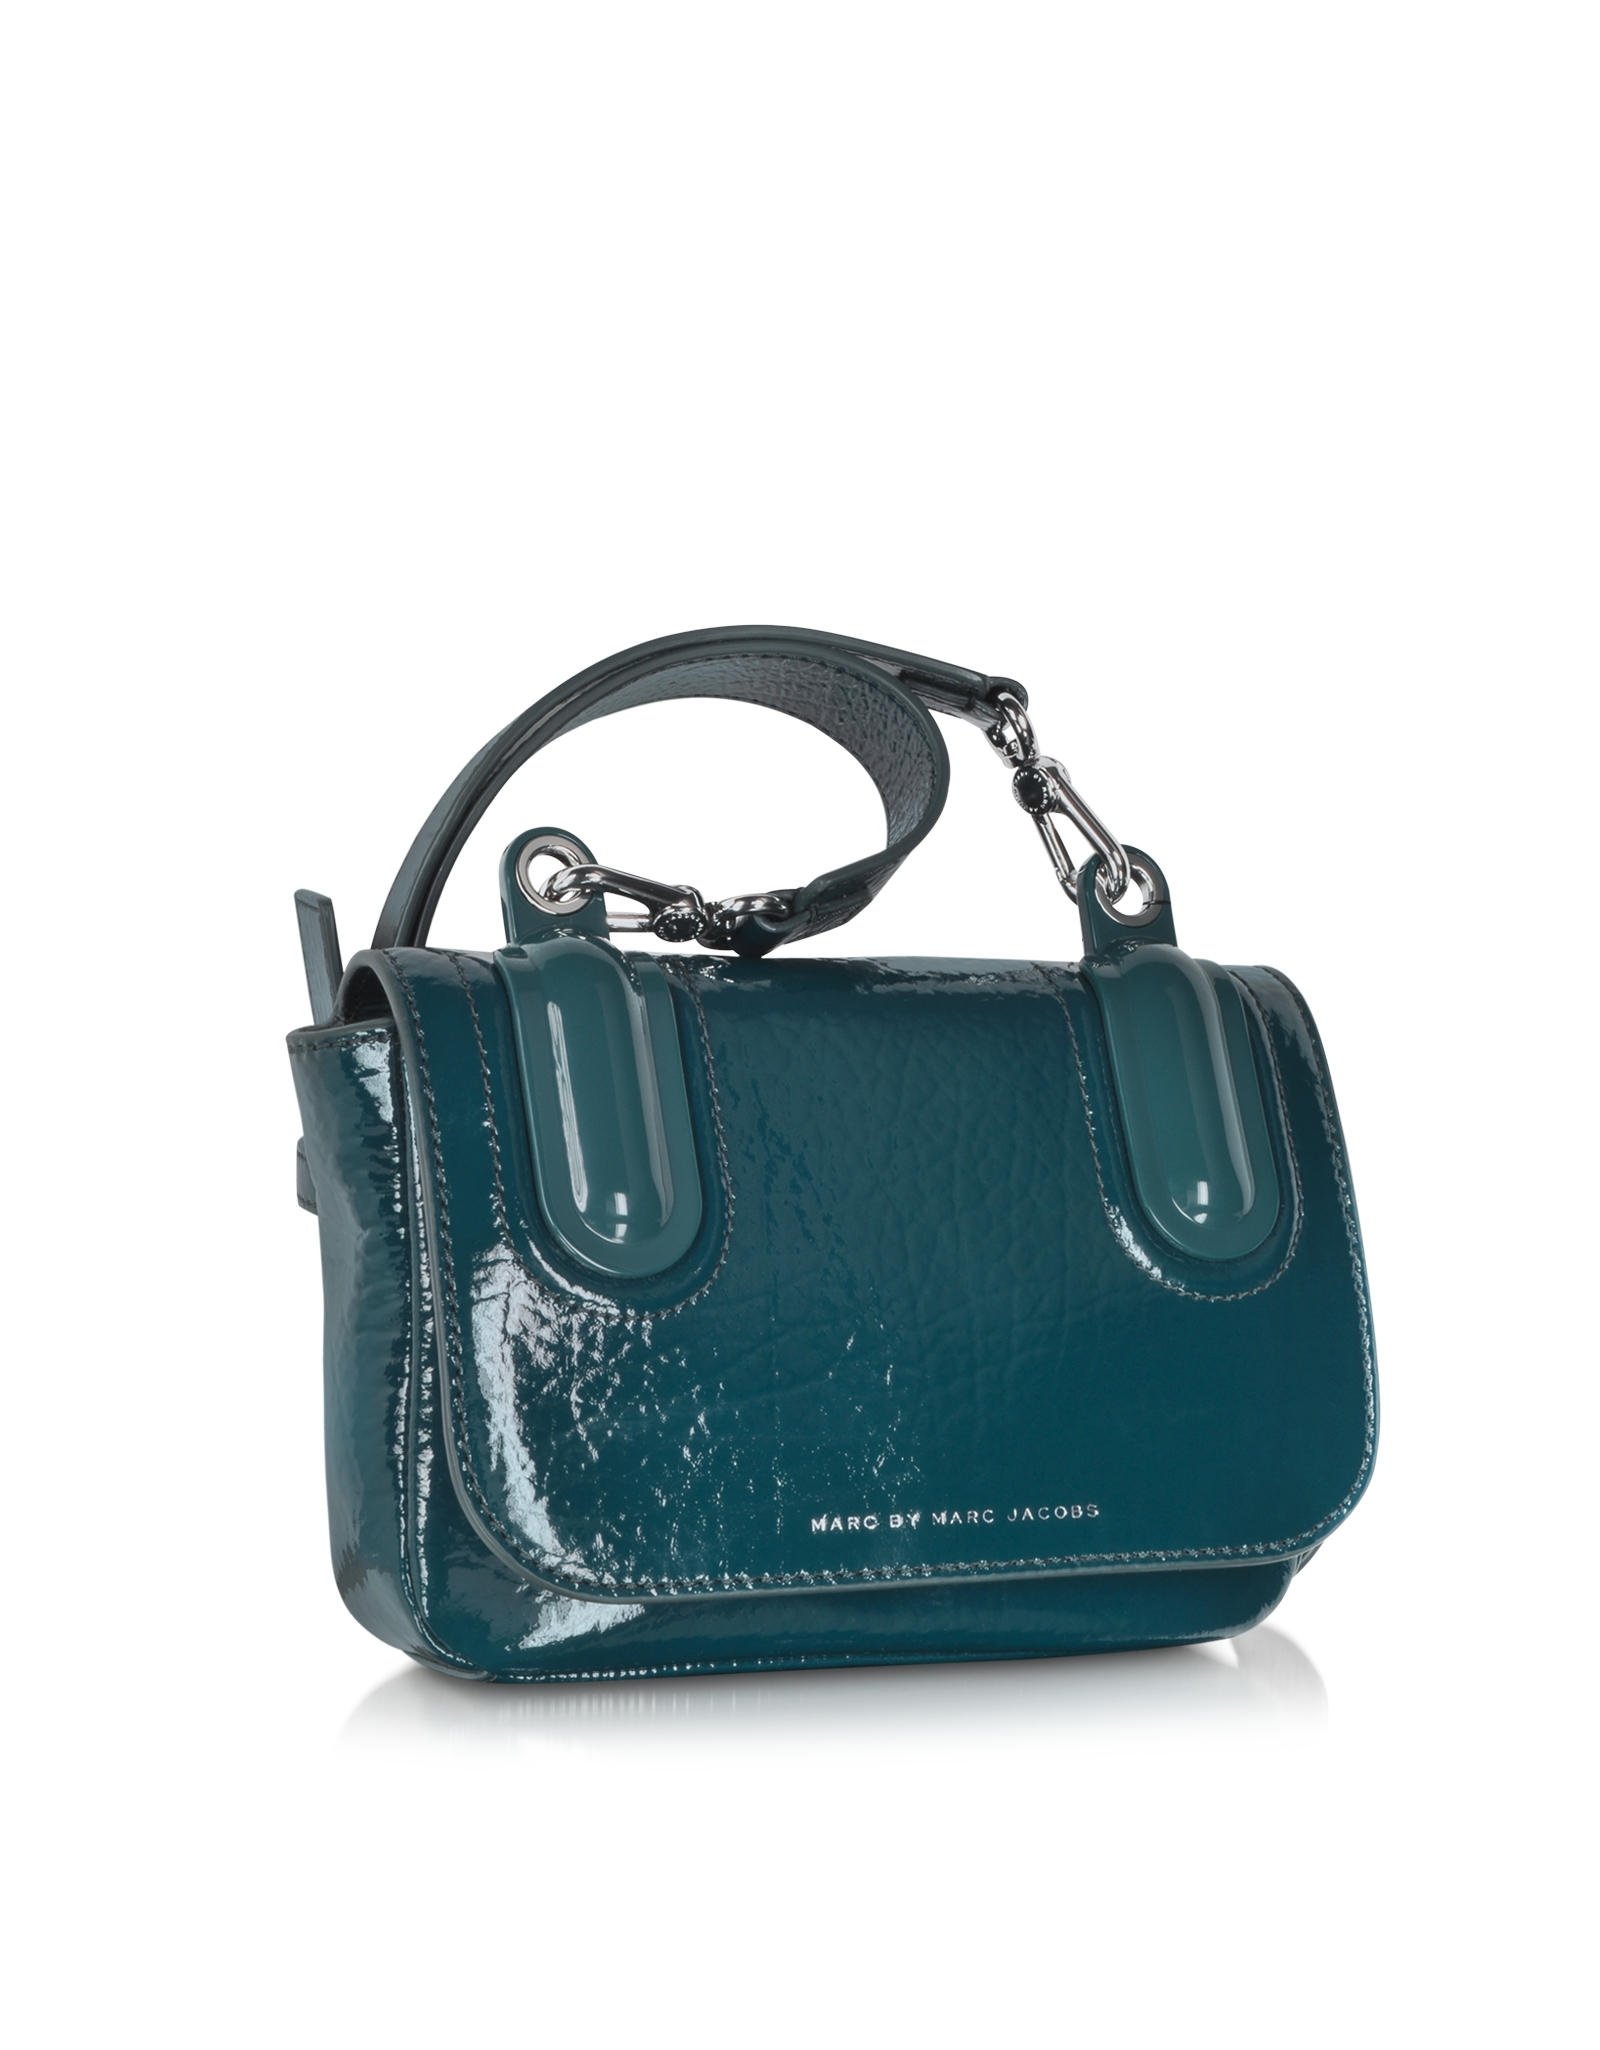 Marc by marc jacobs Ball & Chain Hopper Green Leather Crossbody Bag in Green | Lyst